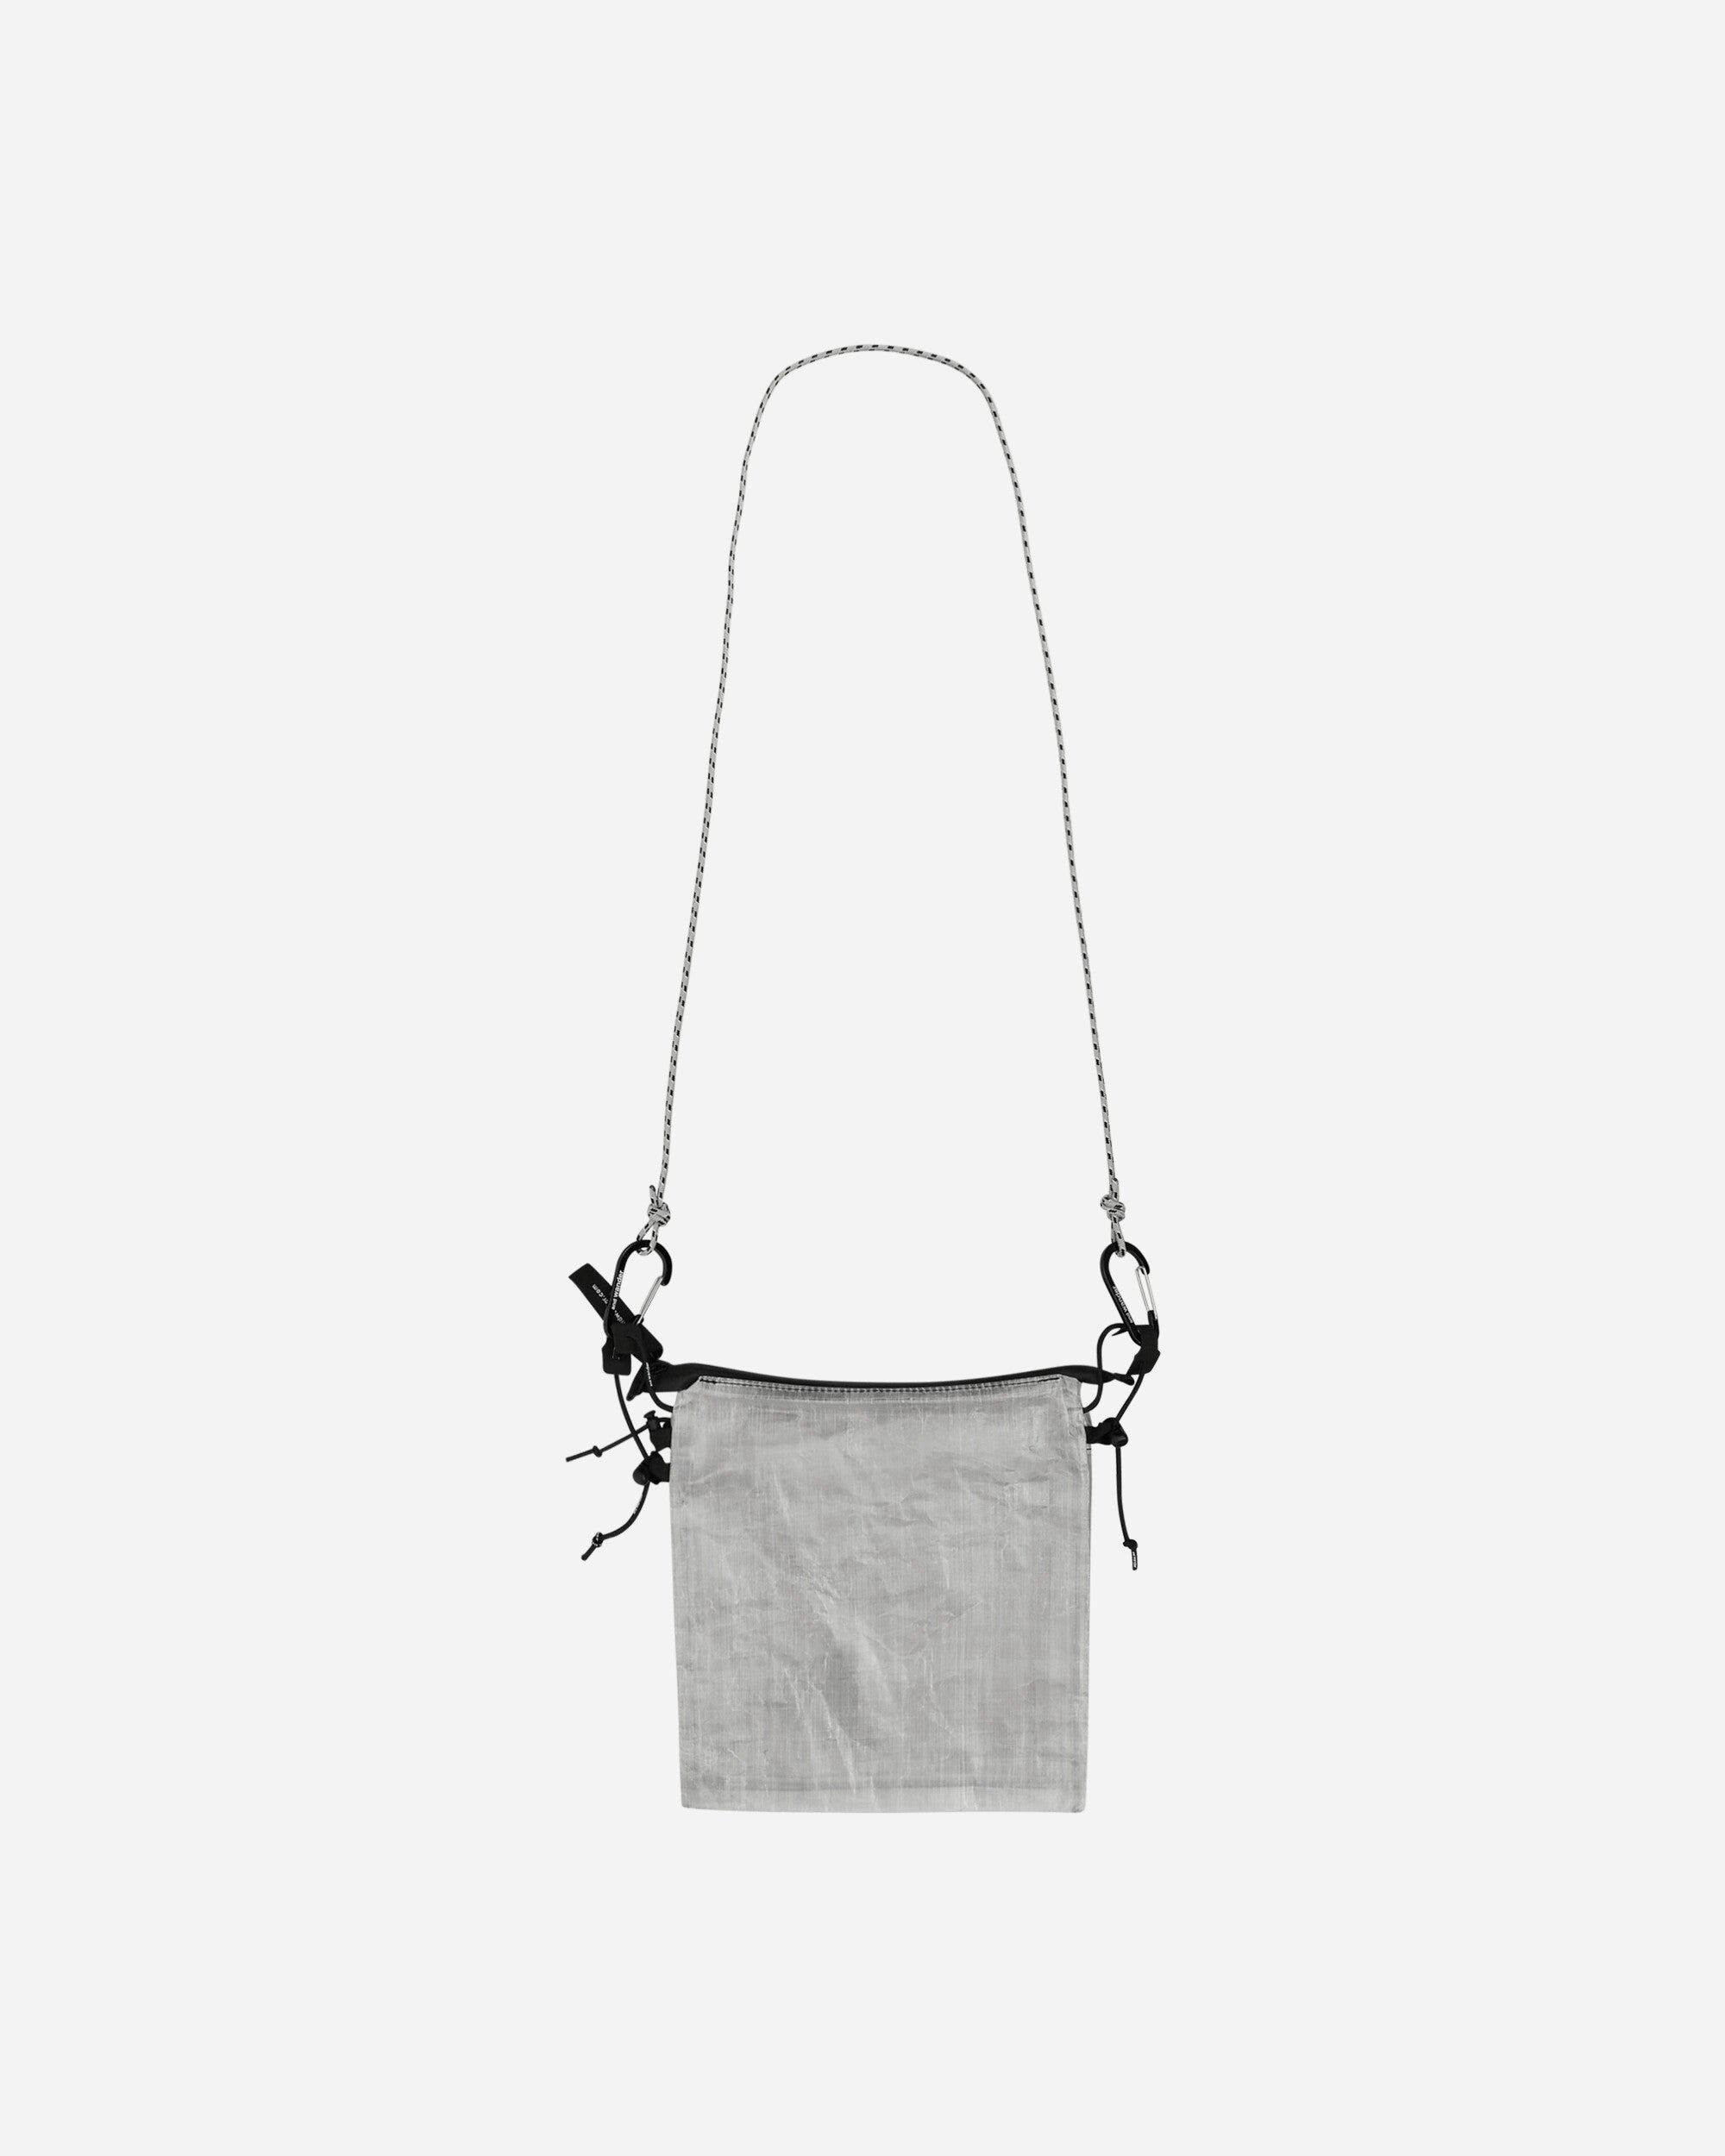 and wander Dyneema Sacoche Off White Bags and Backpacks Pouches 5744975197 031